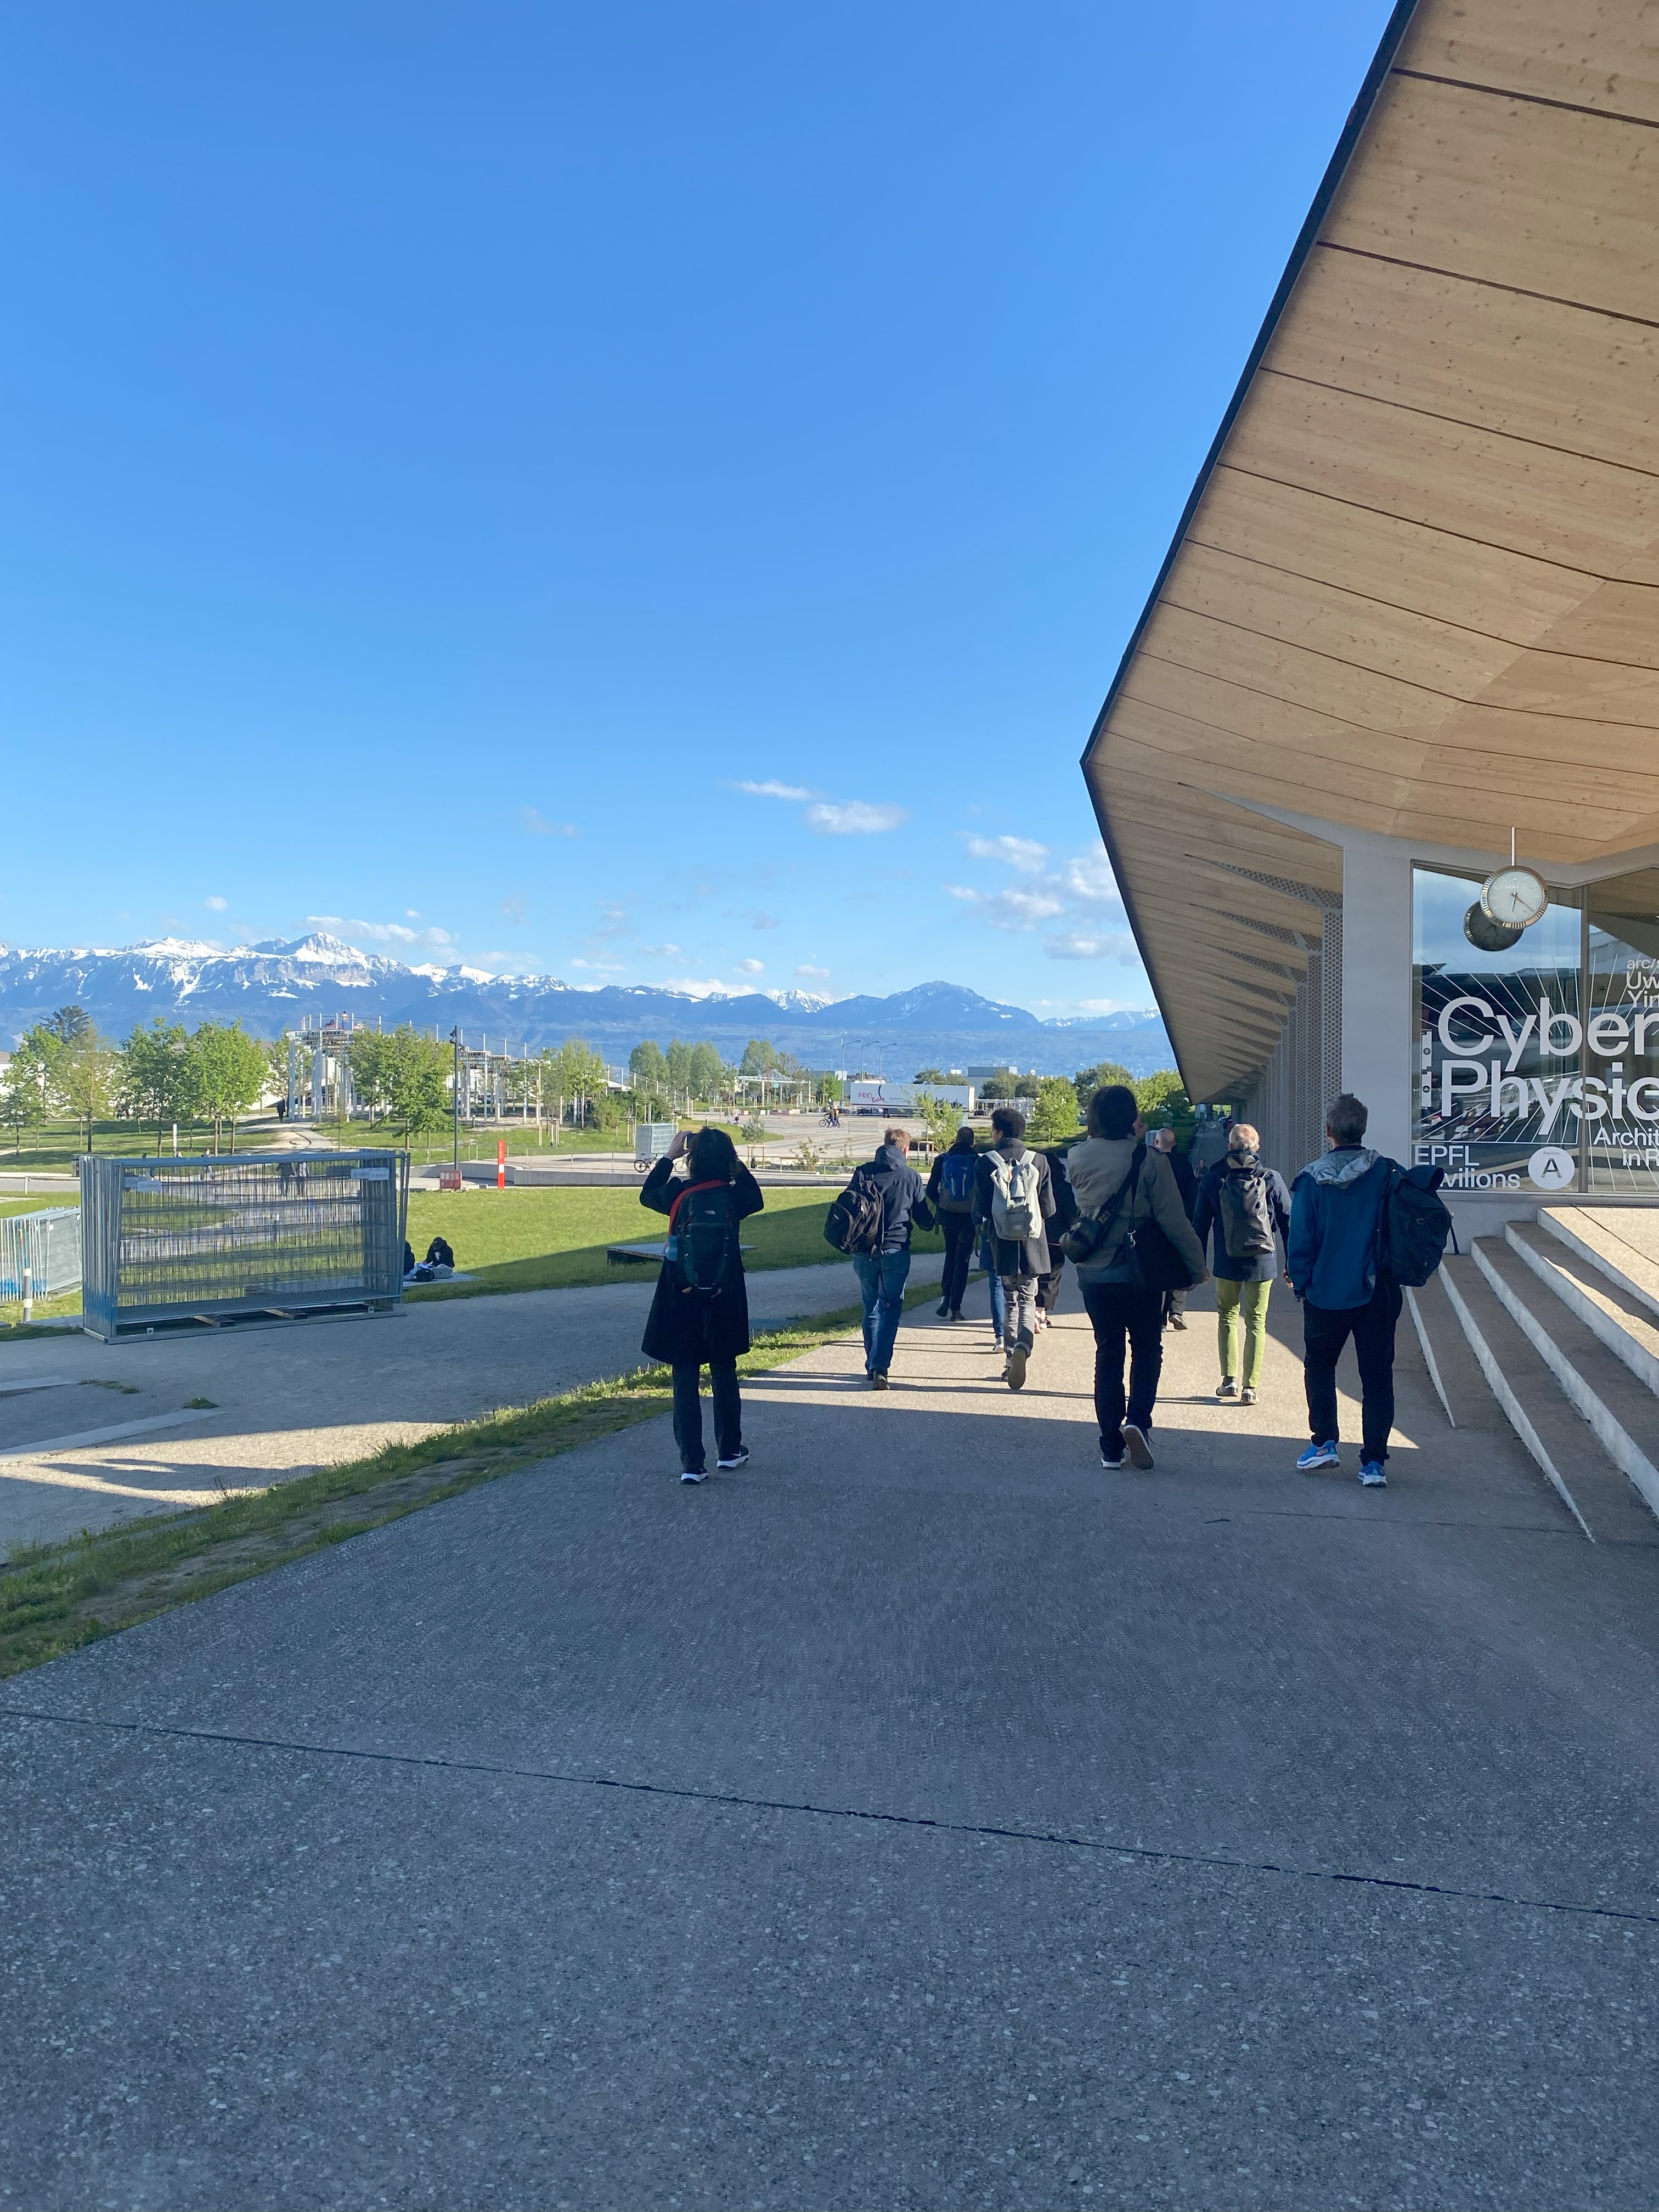 Participants enjoying the scenic surroundings of EPFL, Lausanne, as the first Impresso workshop comes to a close